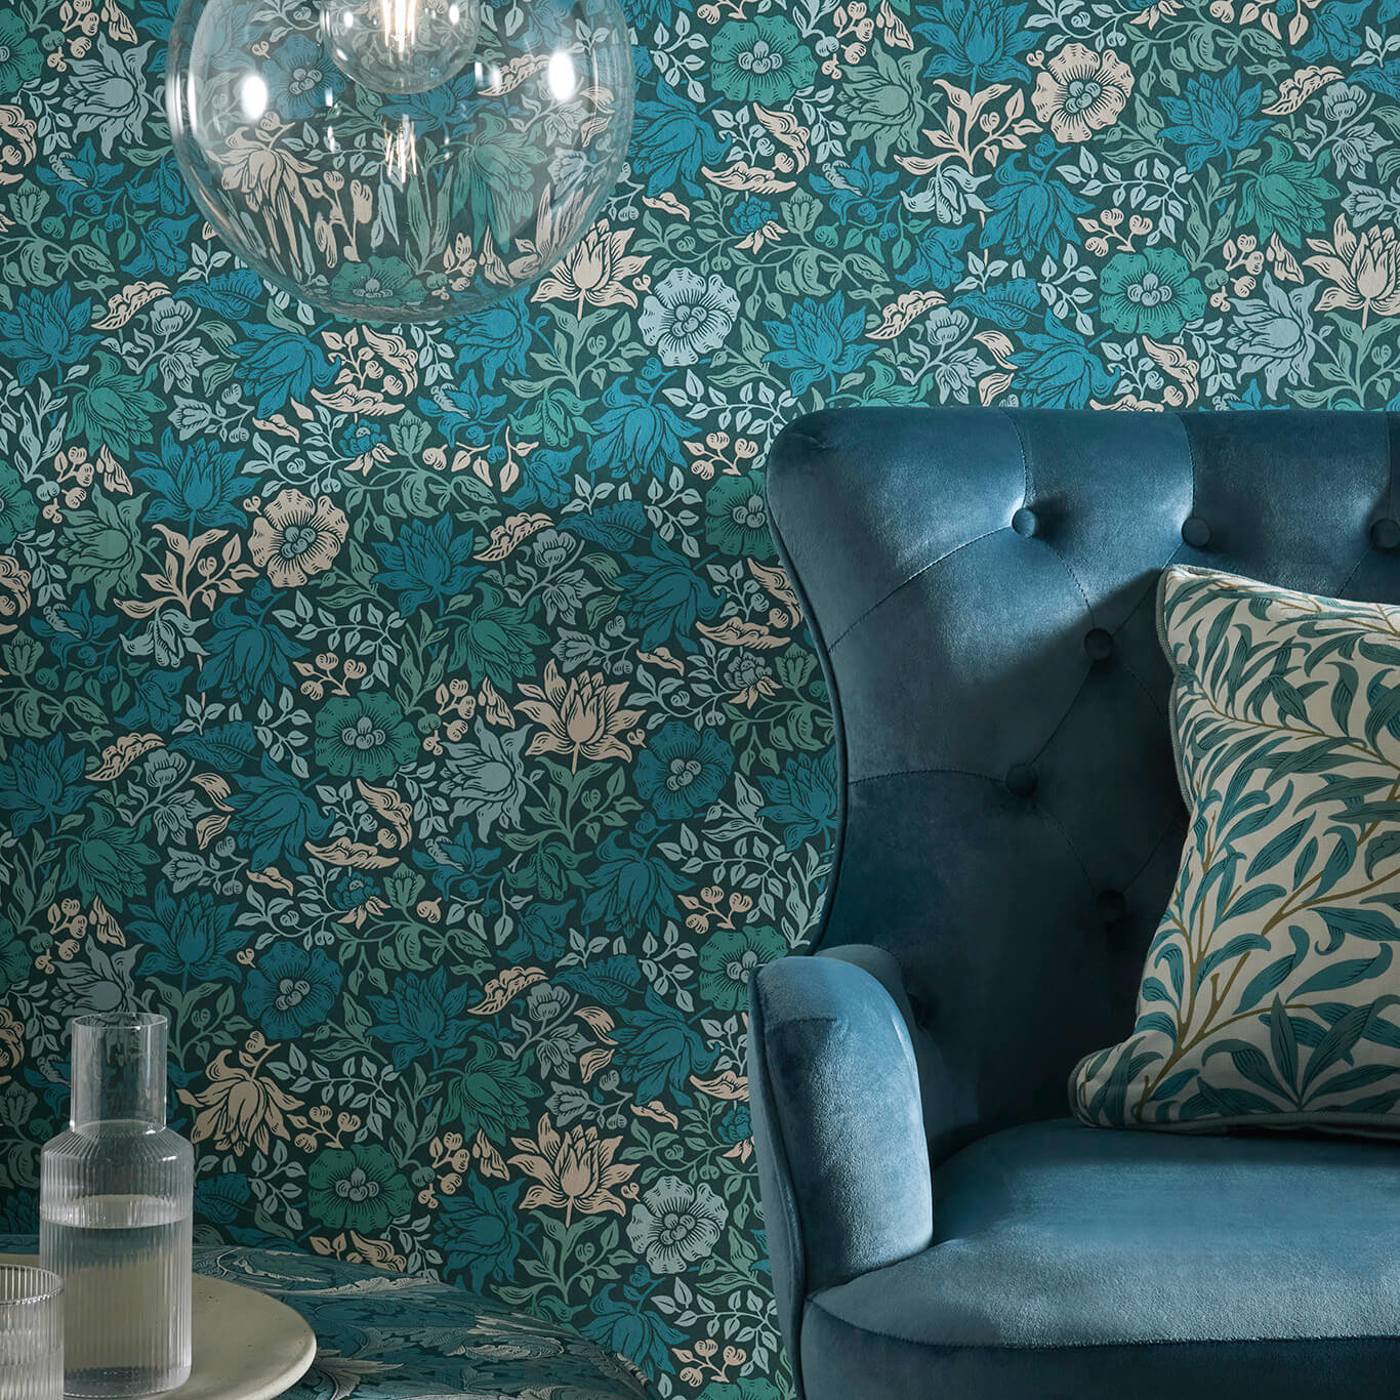 Mallow Wallpaper by William Morris